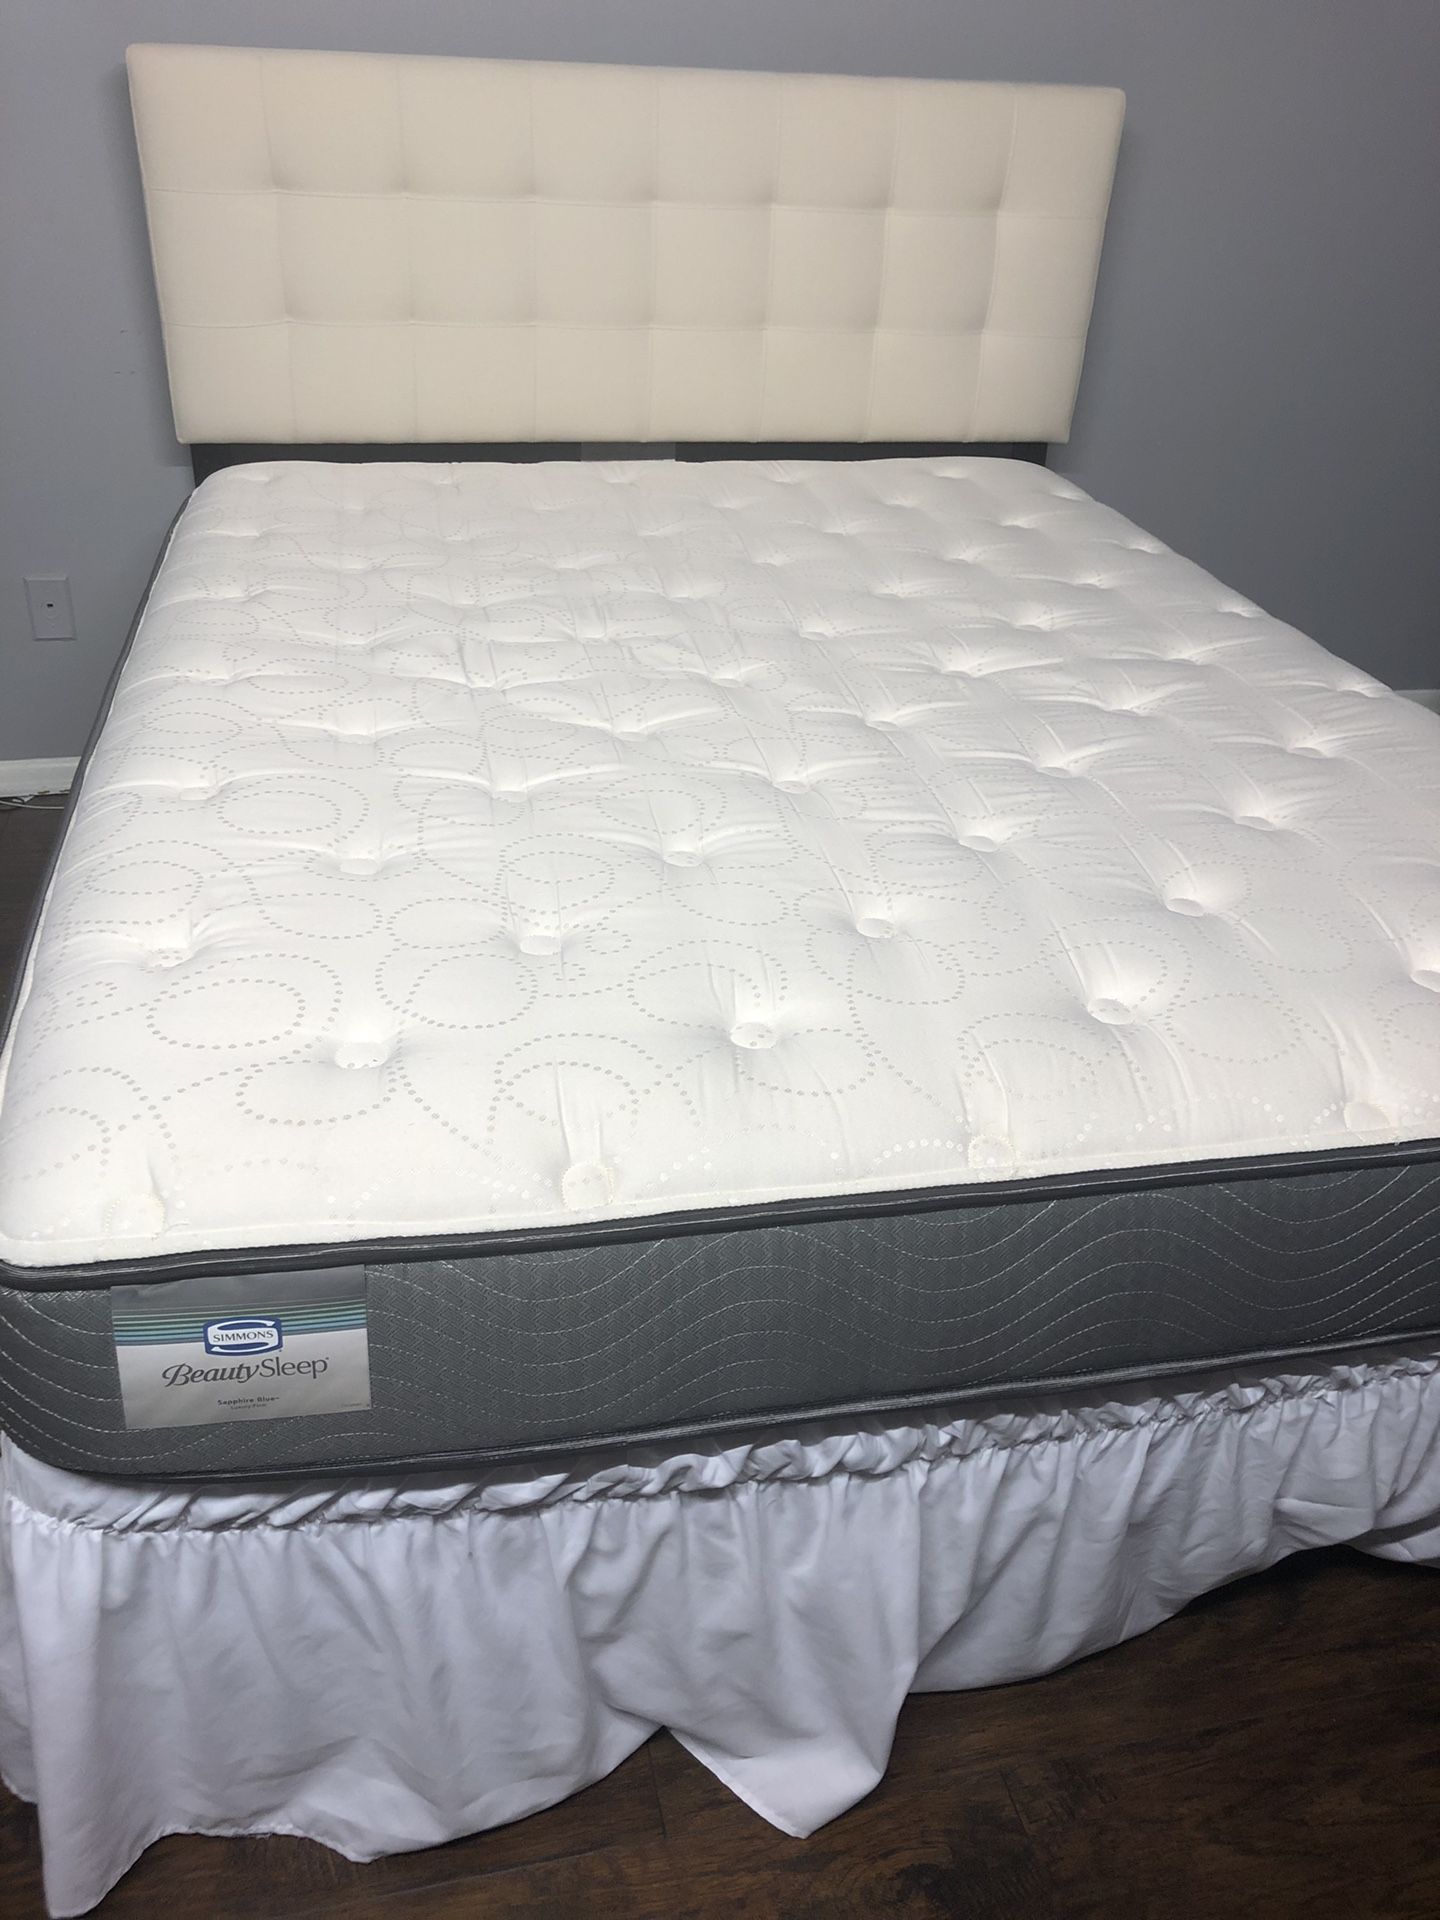 Queen bed for sale! Moving sale!